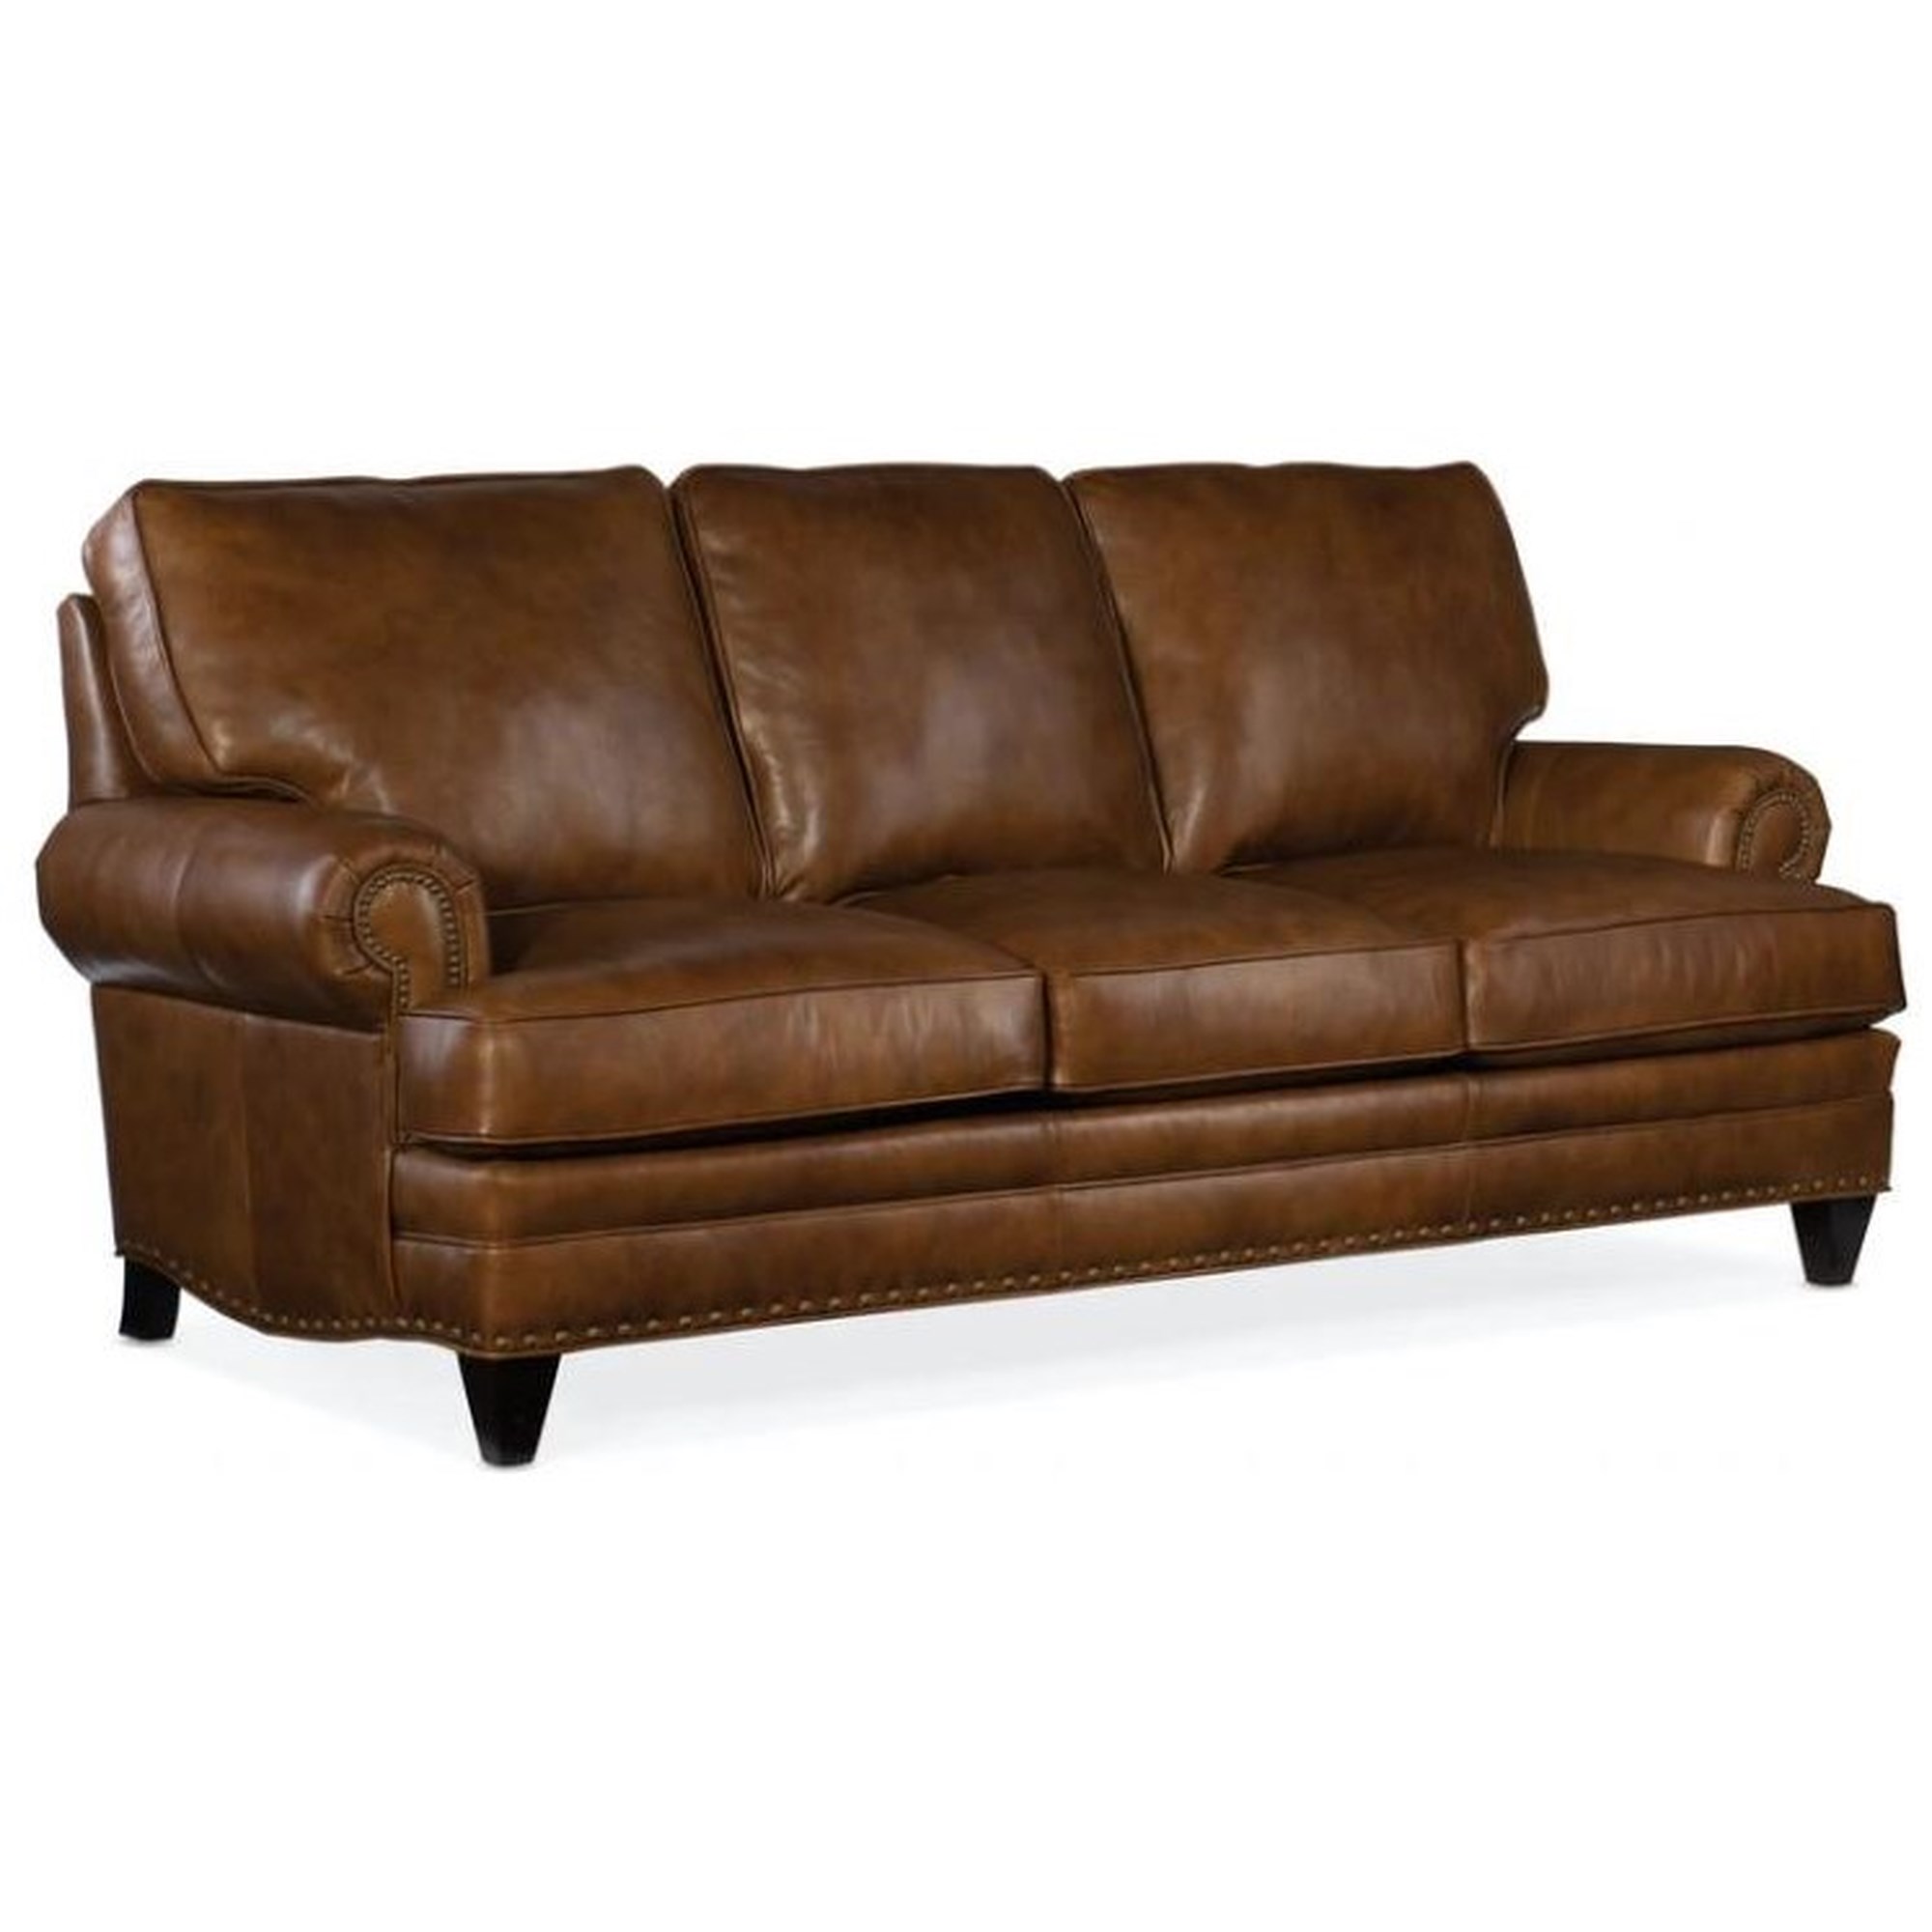 Leather Upholstery - Choosing Classic Style and Durability